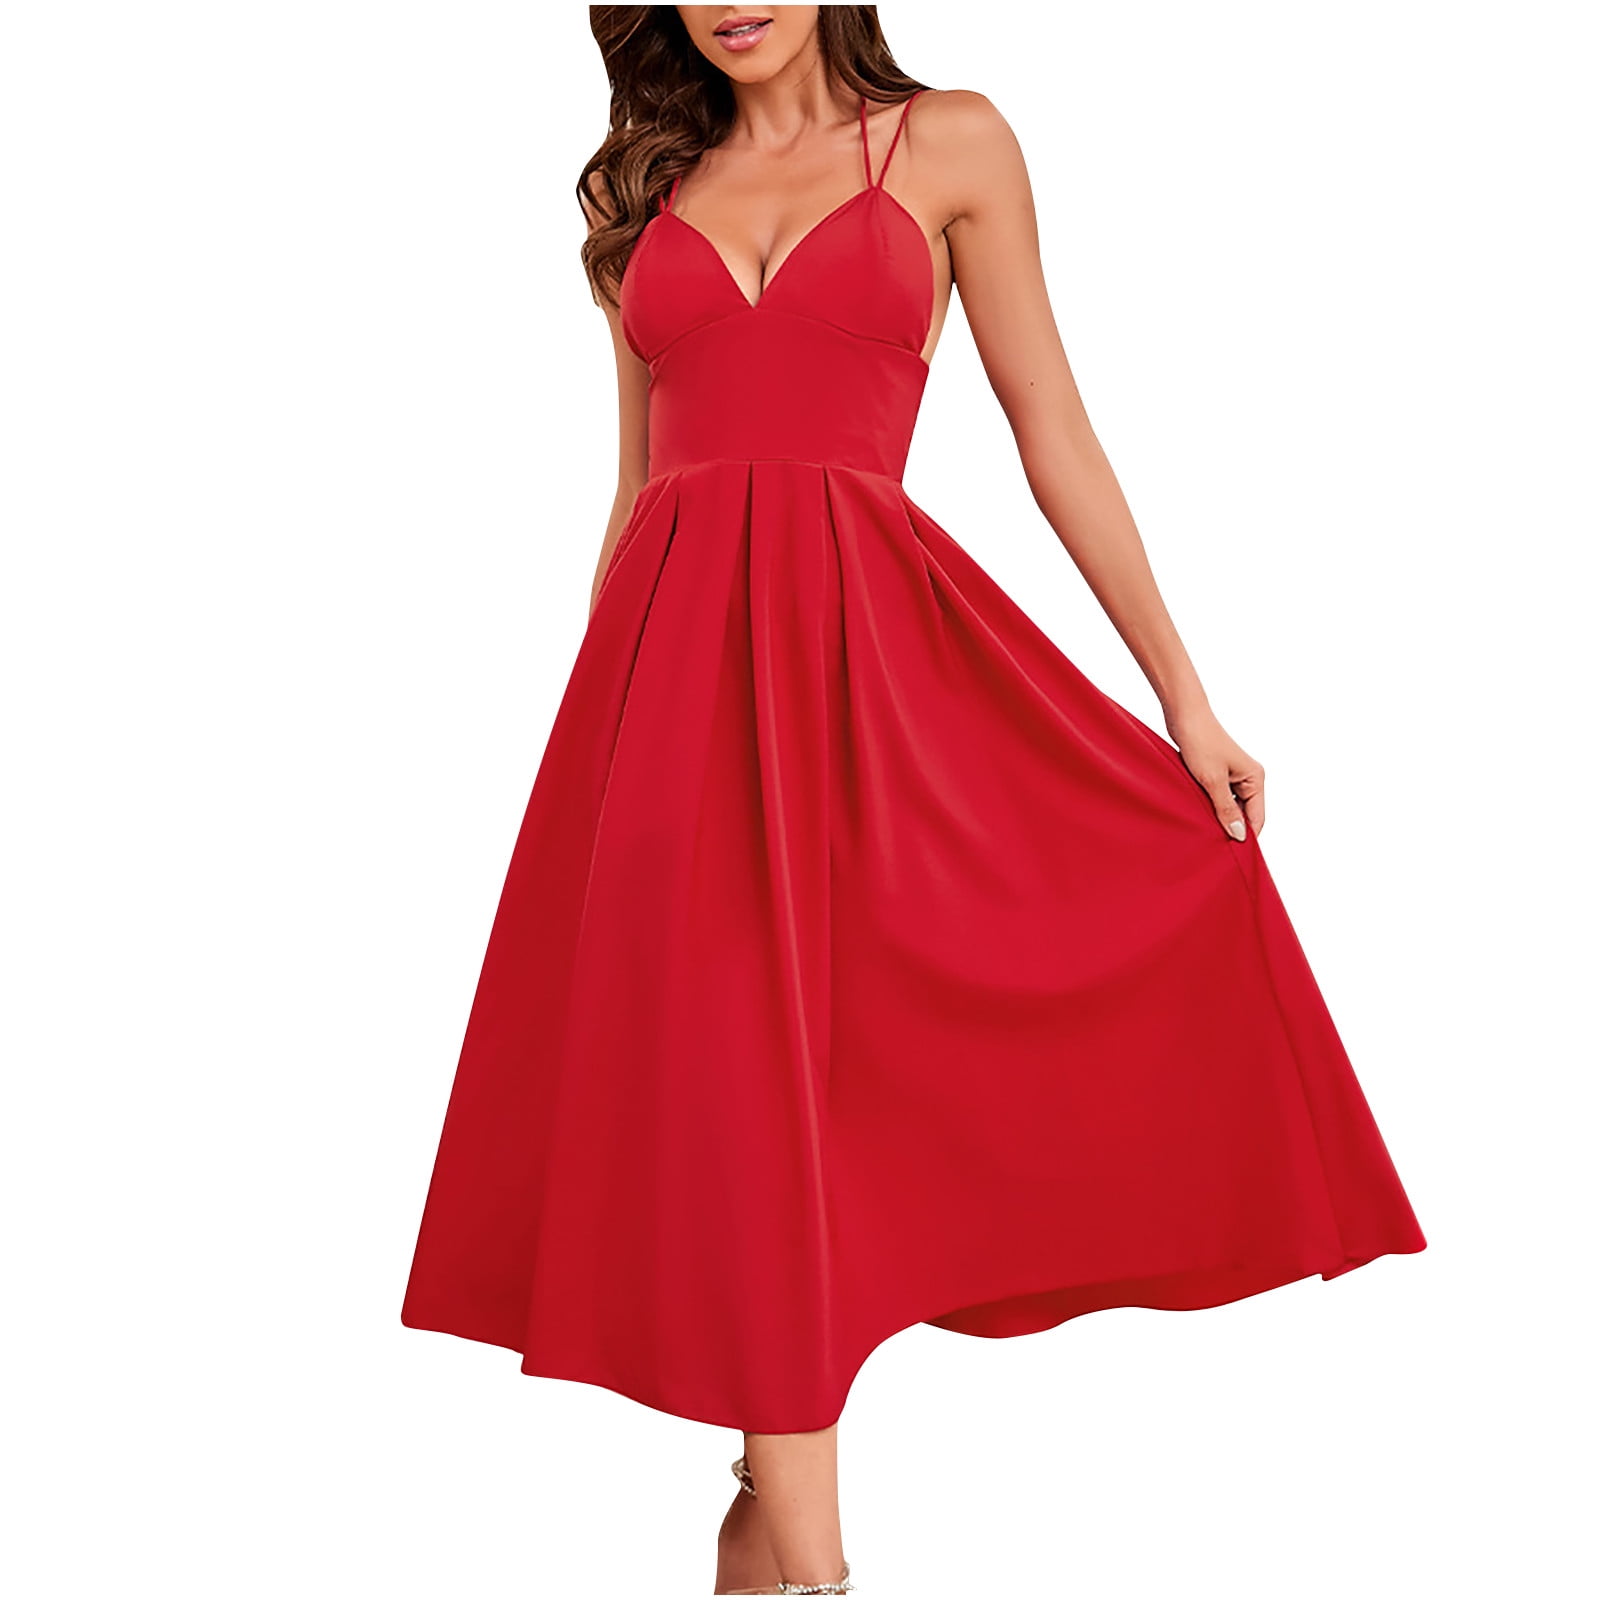 Red Jersey Spaghetti Straps Plunging Slit Simple Bridesmaid Prom Dress